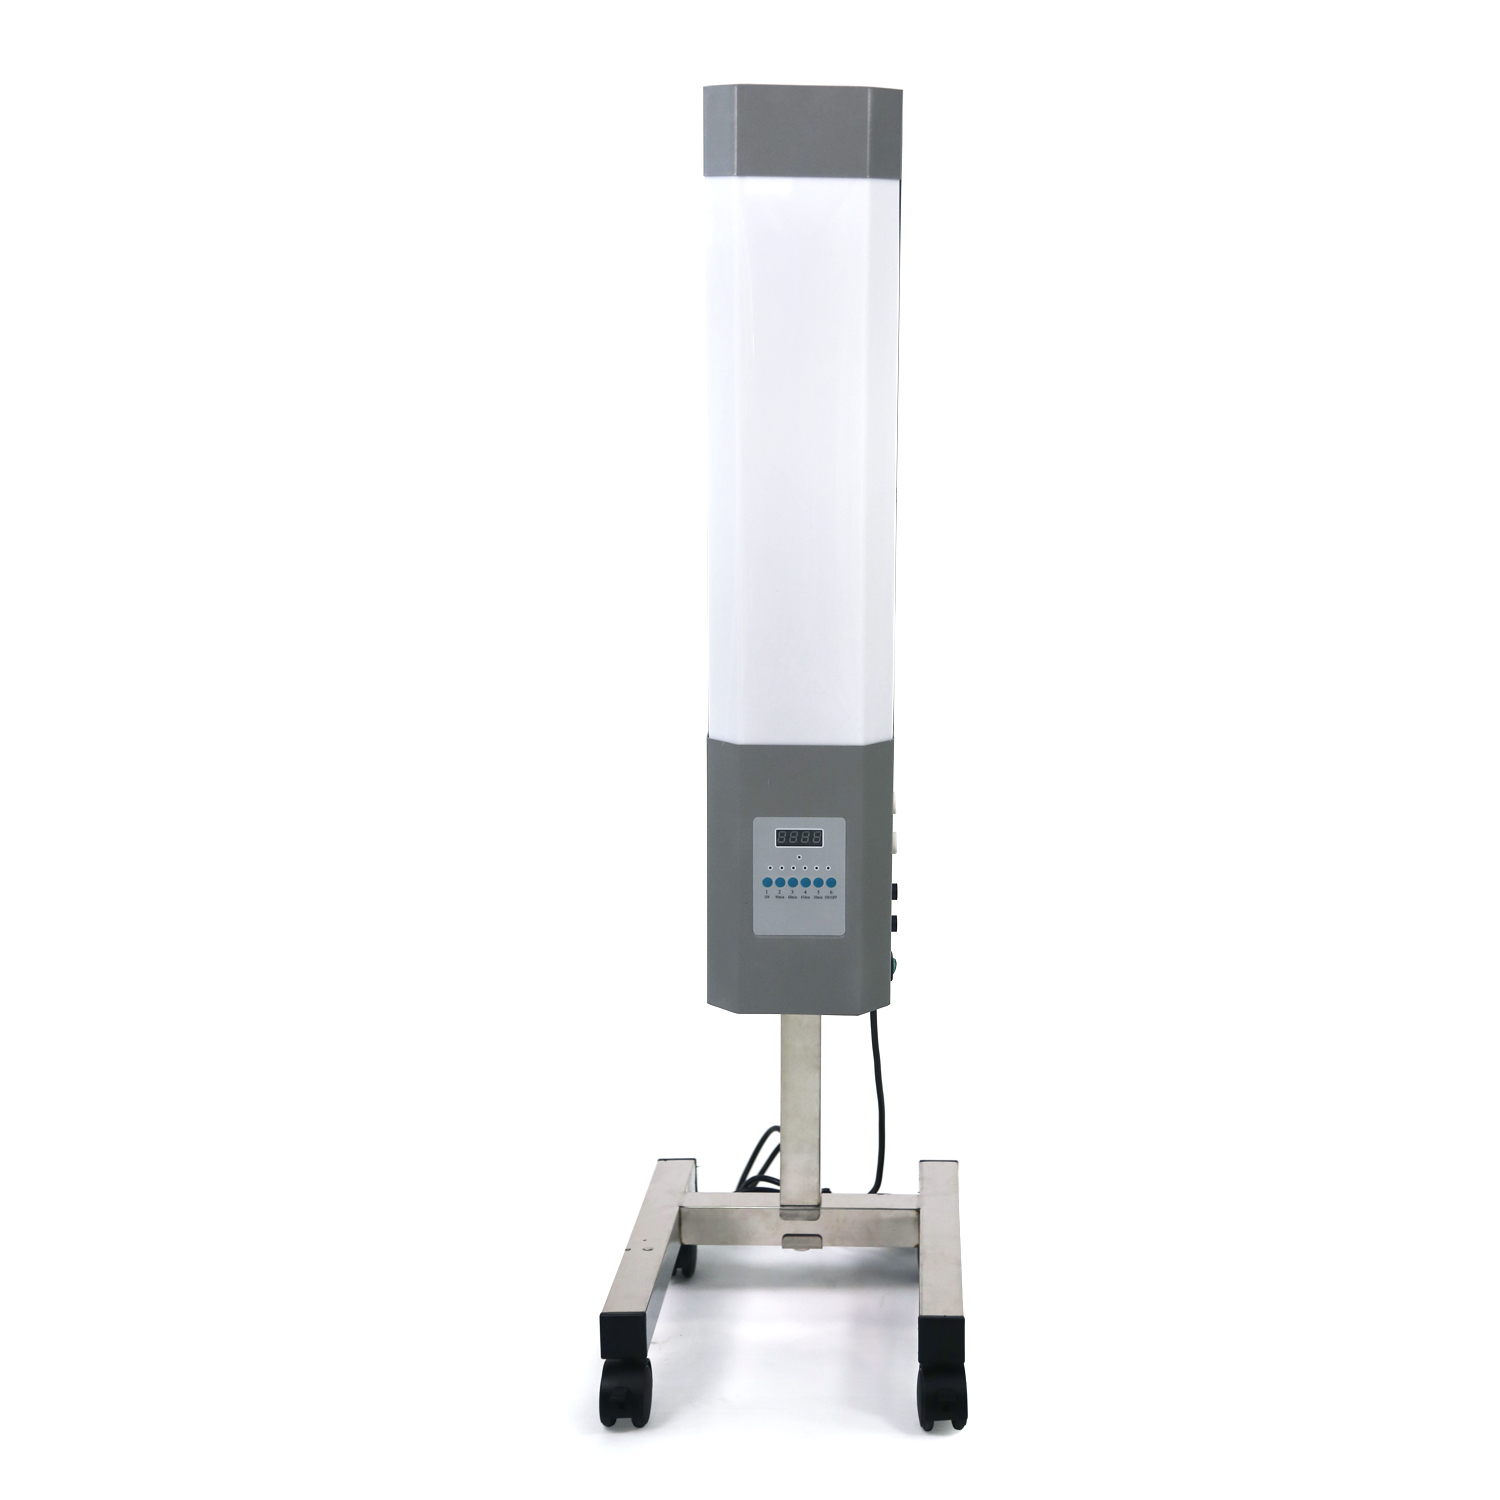 uv lamp 15w uv light ultraviolet sterilizing lamp with ozone for hospital from uvc germicidal lamp manufacturer